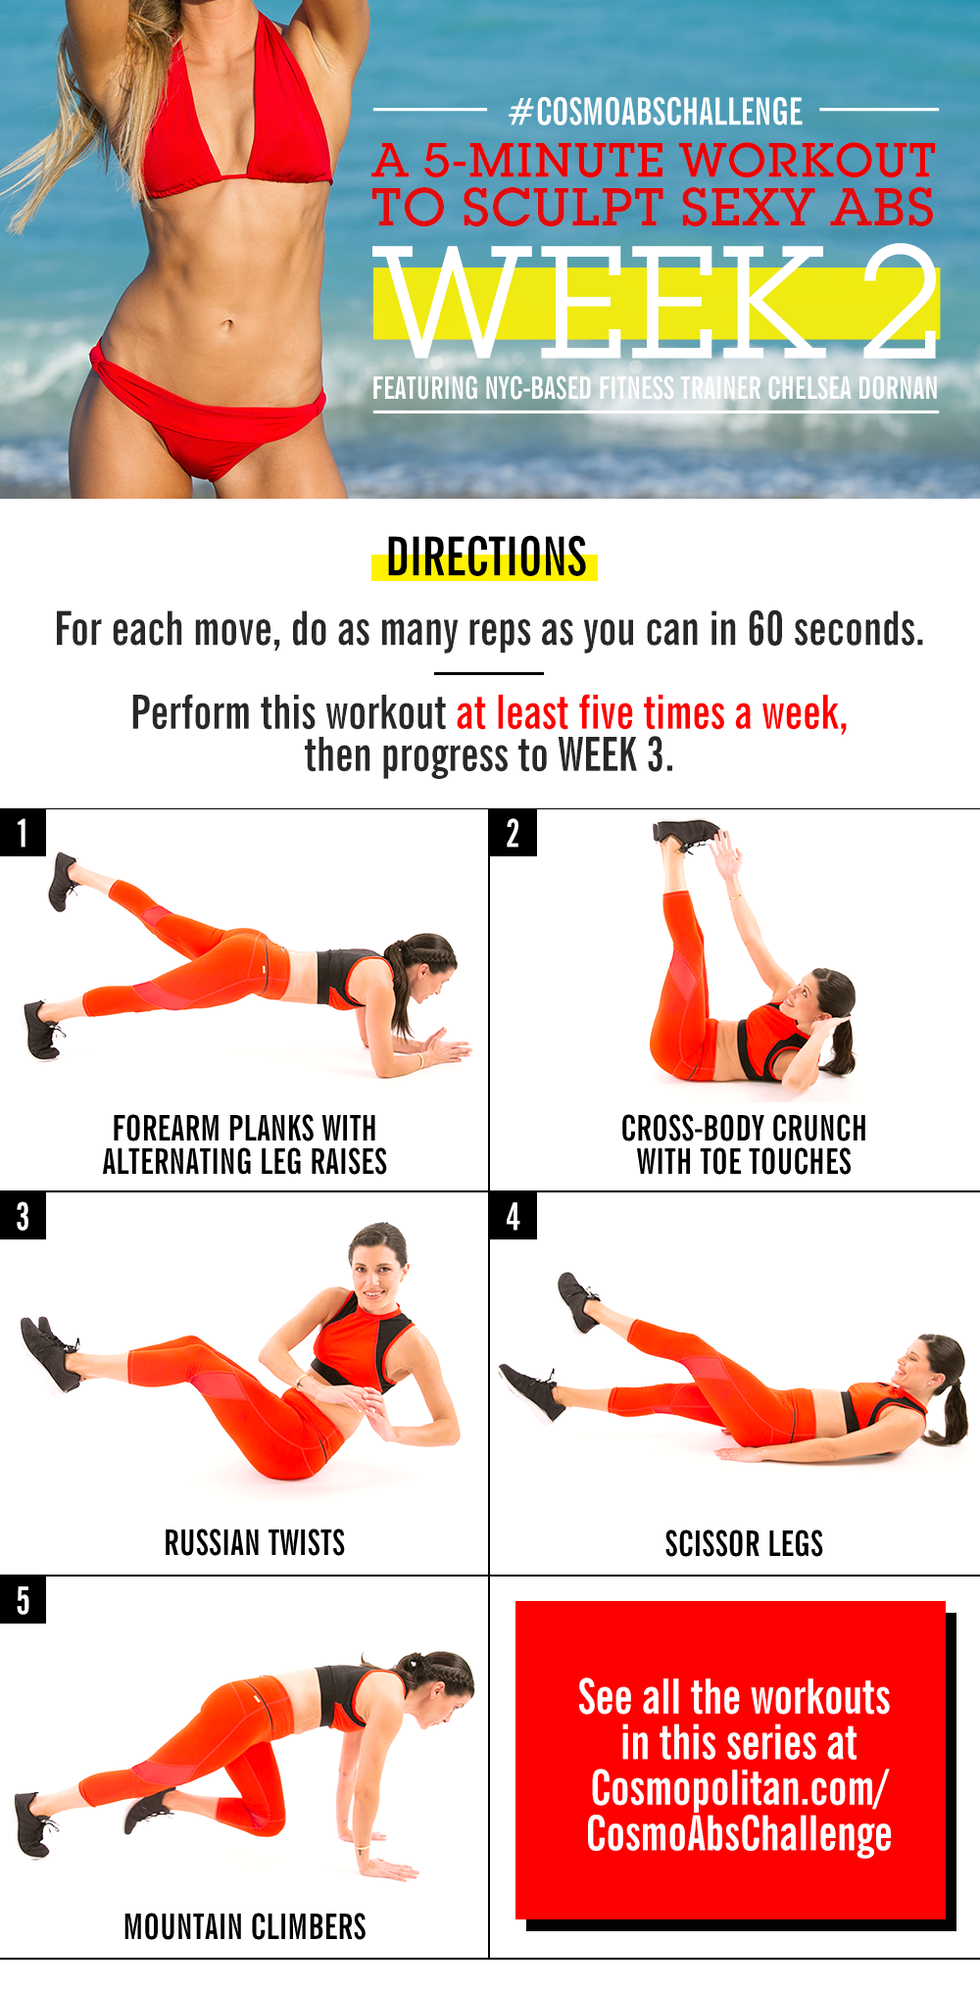 How To Get A Flat Tummy: 5 things to do to achieve your goal of getting a flat  tummy